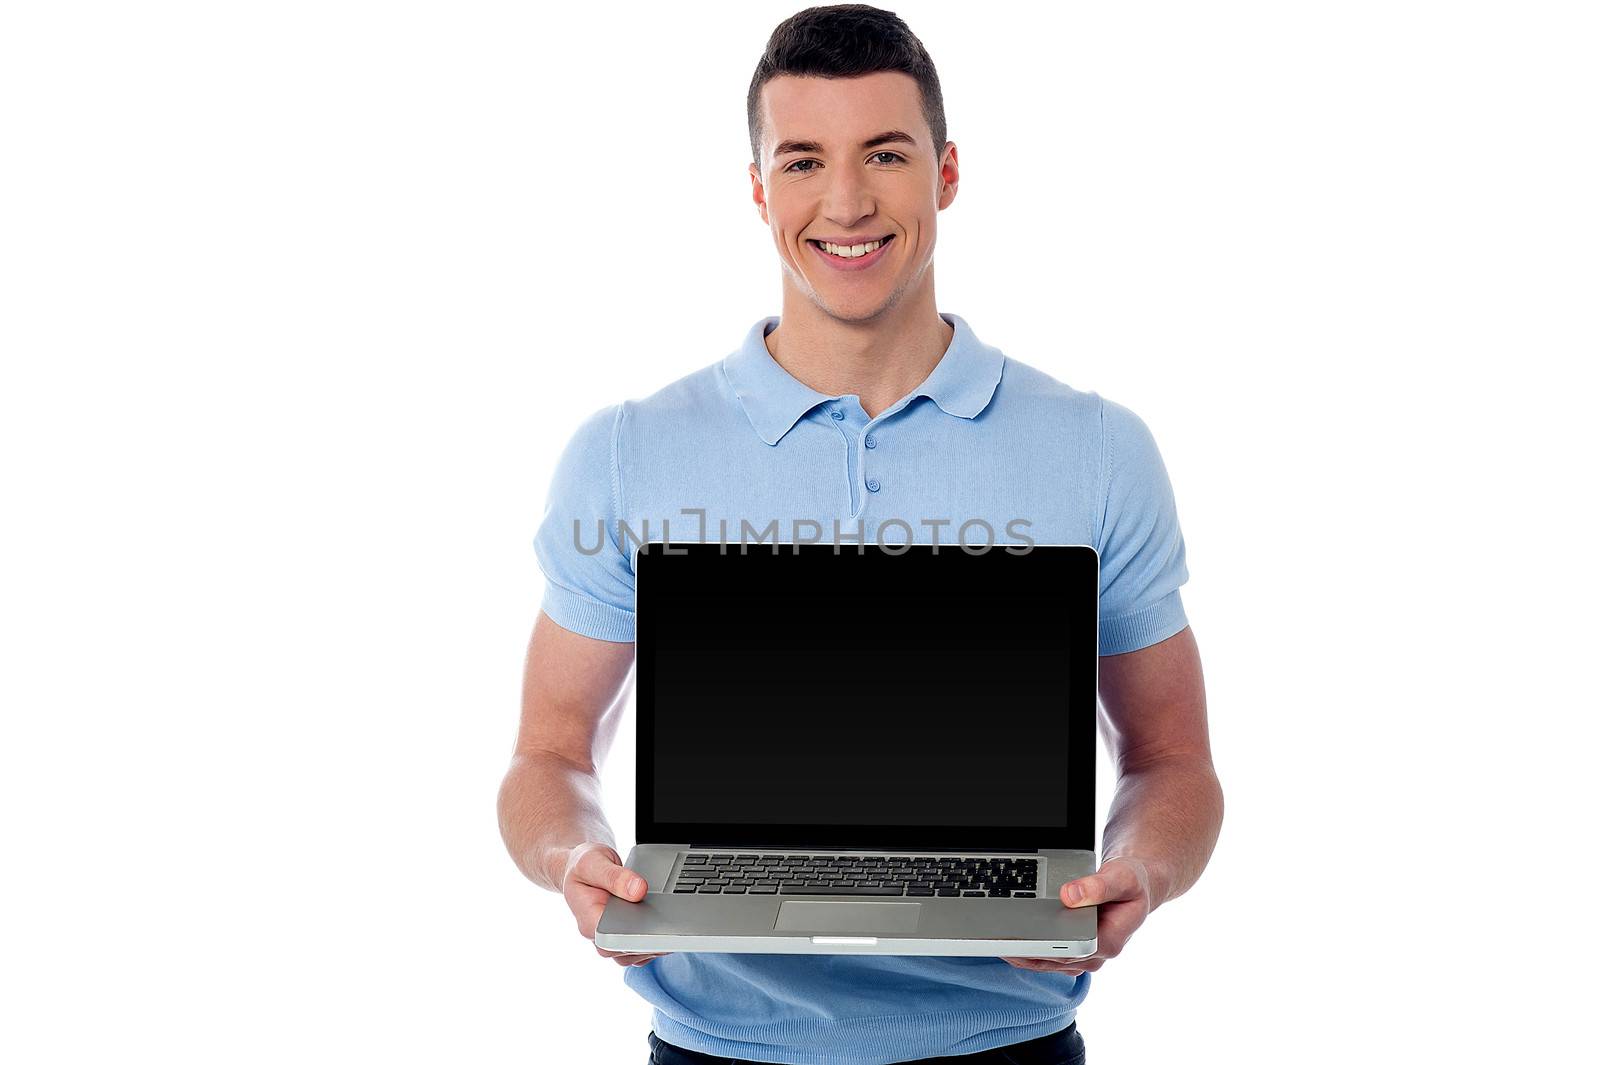 Handsome young man showing his new laptop